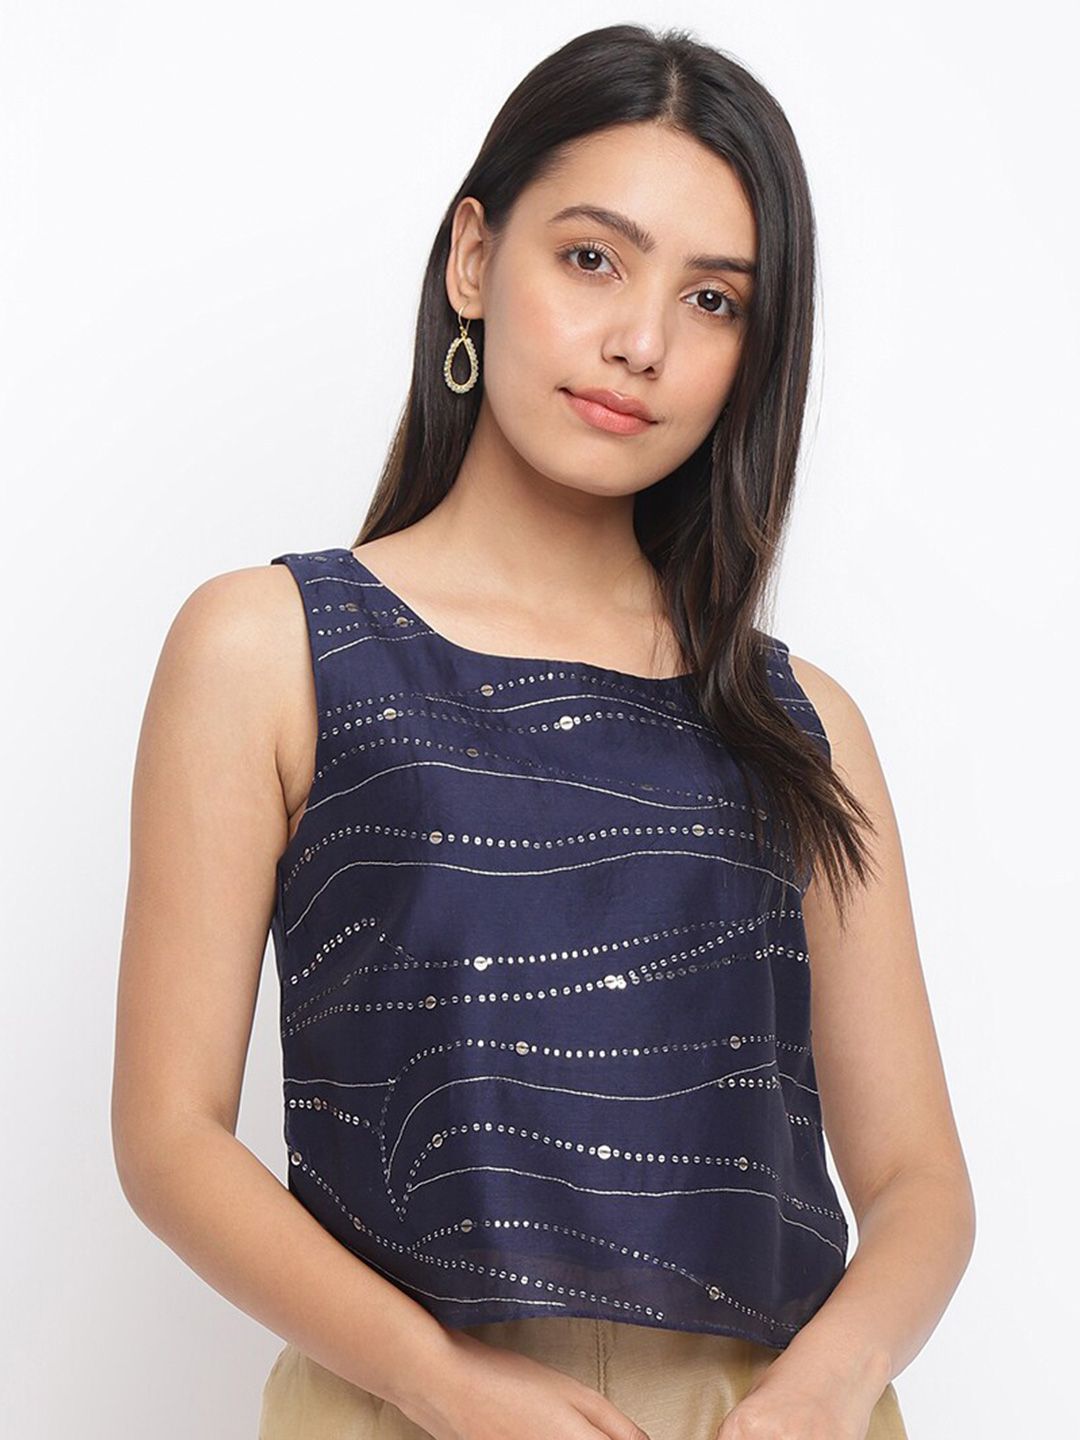 Fabindia Women Blue & Silver-Toned Embellished Print Top Price in India